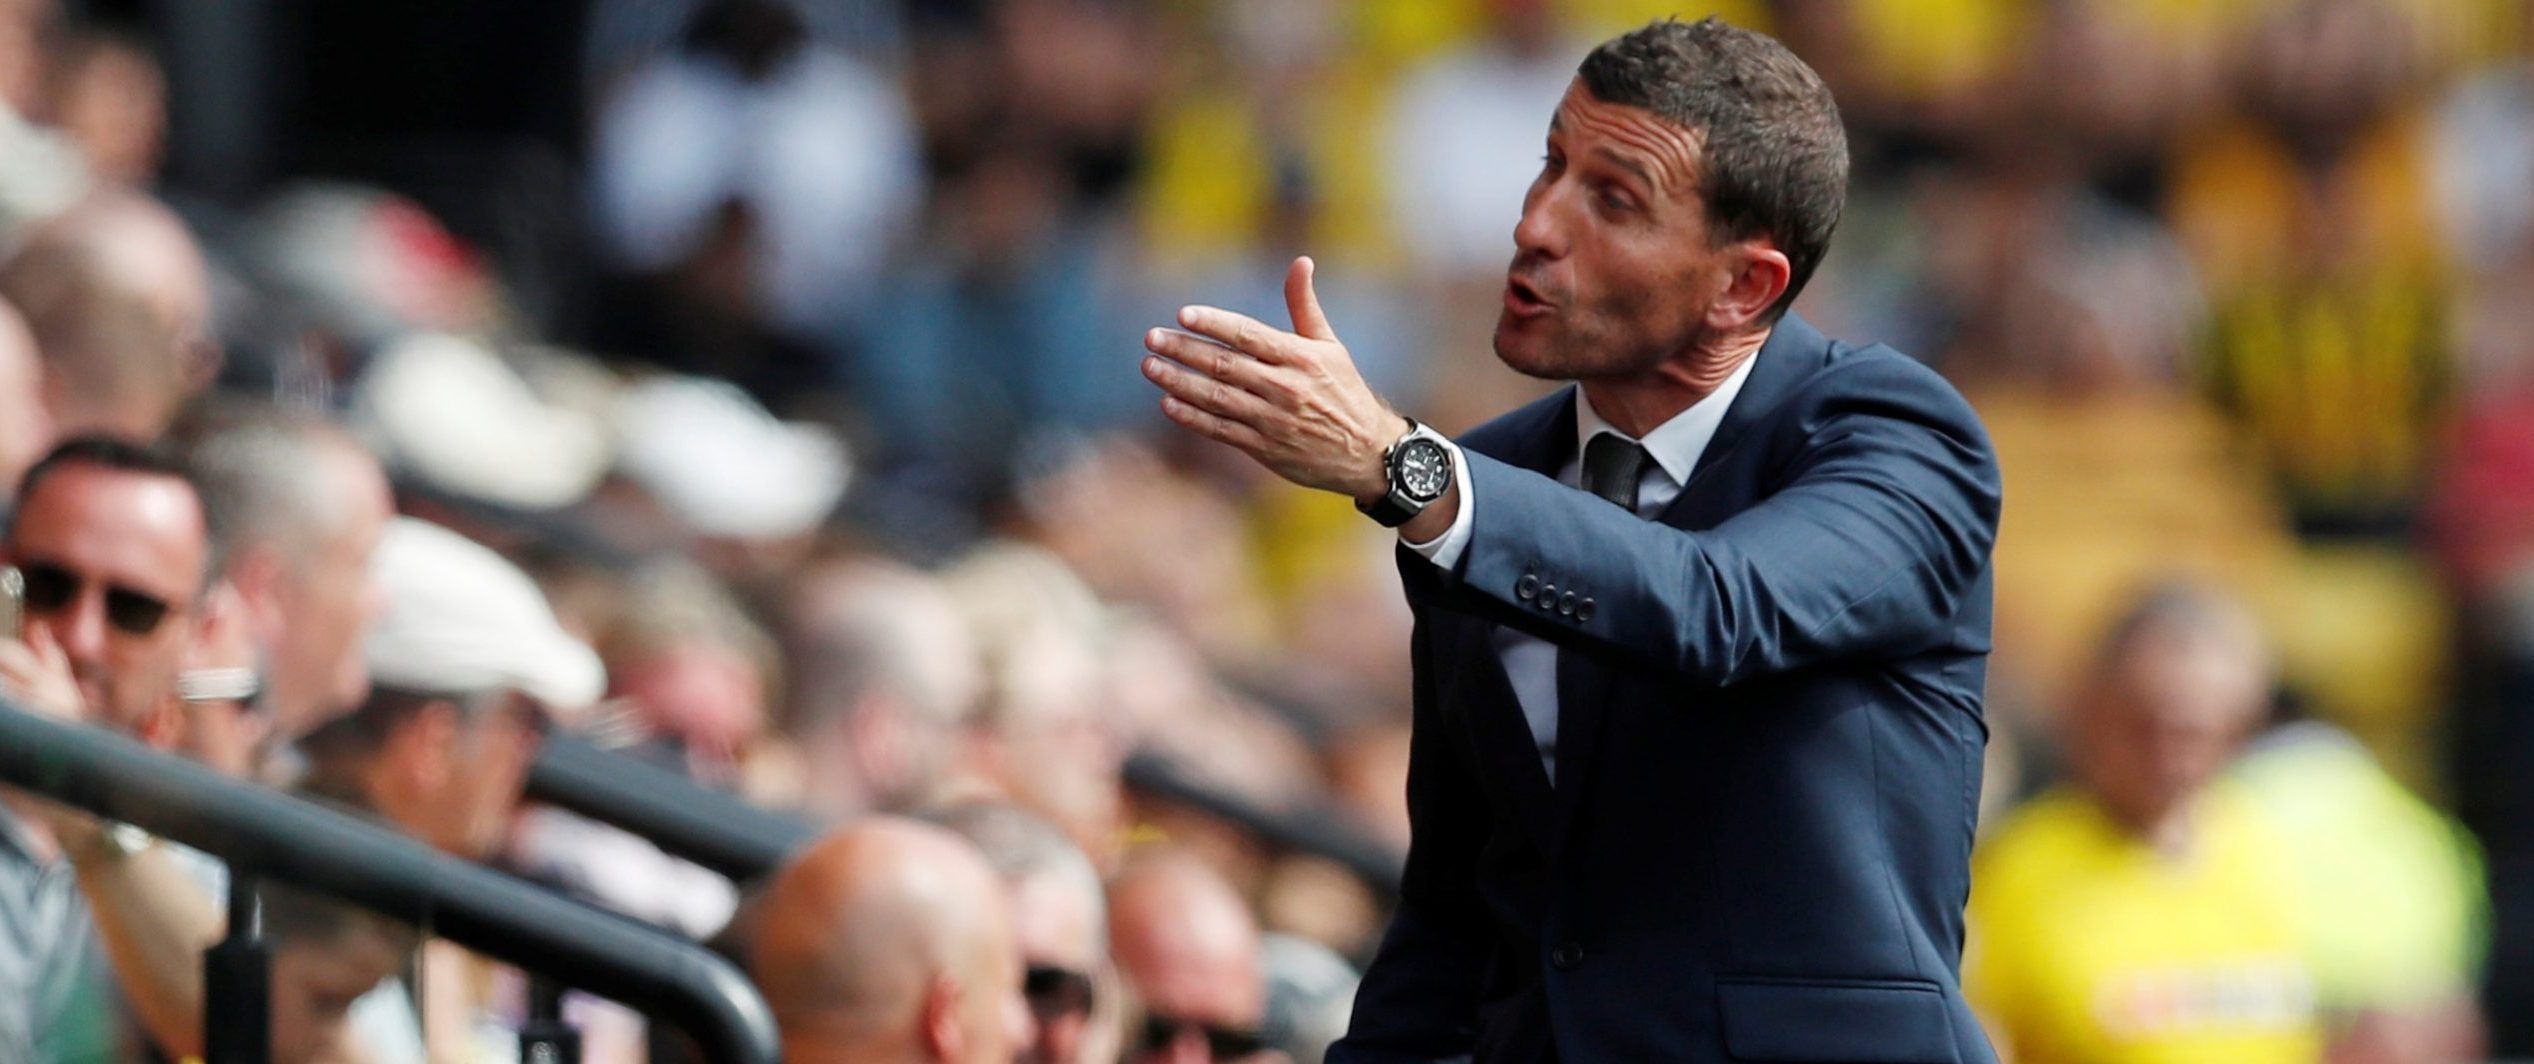 Soccer Football - Premier League - Watford v West Ham United - Vicarage Road, Watford, Britain - August 24, 2019  Watford manager Javi Gracia reacts        REUTERS/Russell Cheyne  EDITORIAL USE ONLY. No use with unauthorized audio, video, data, fixture lists, club/league logos or 